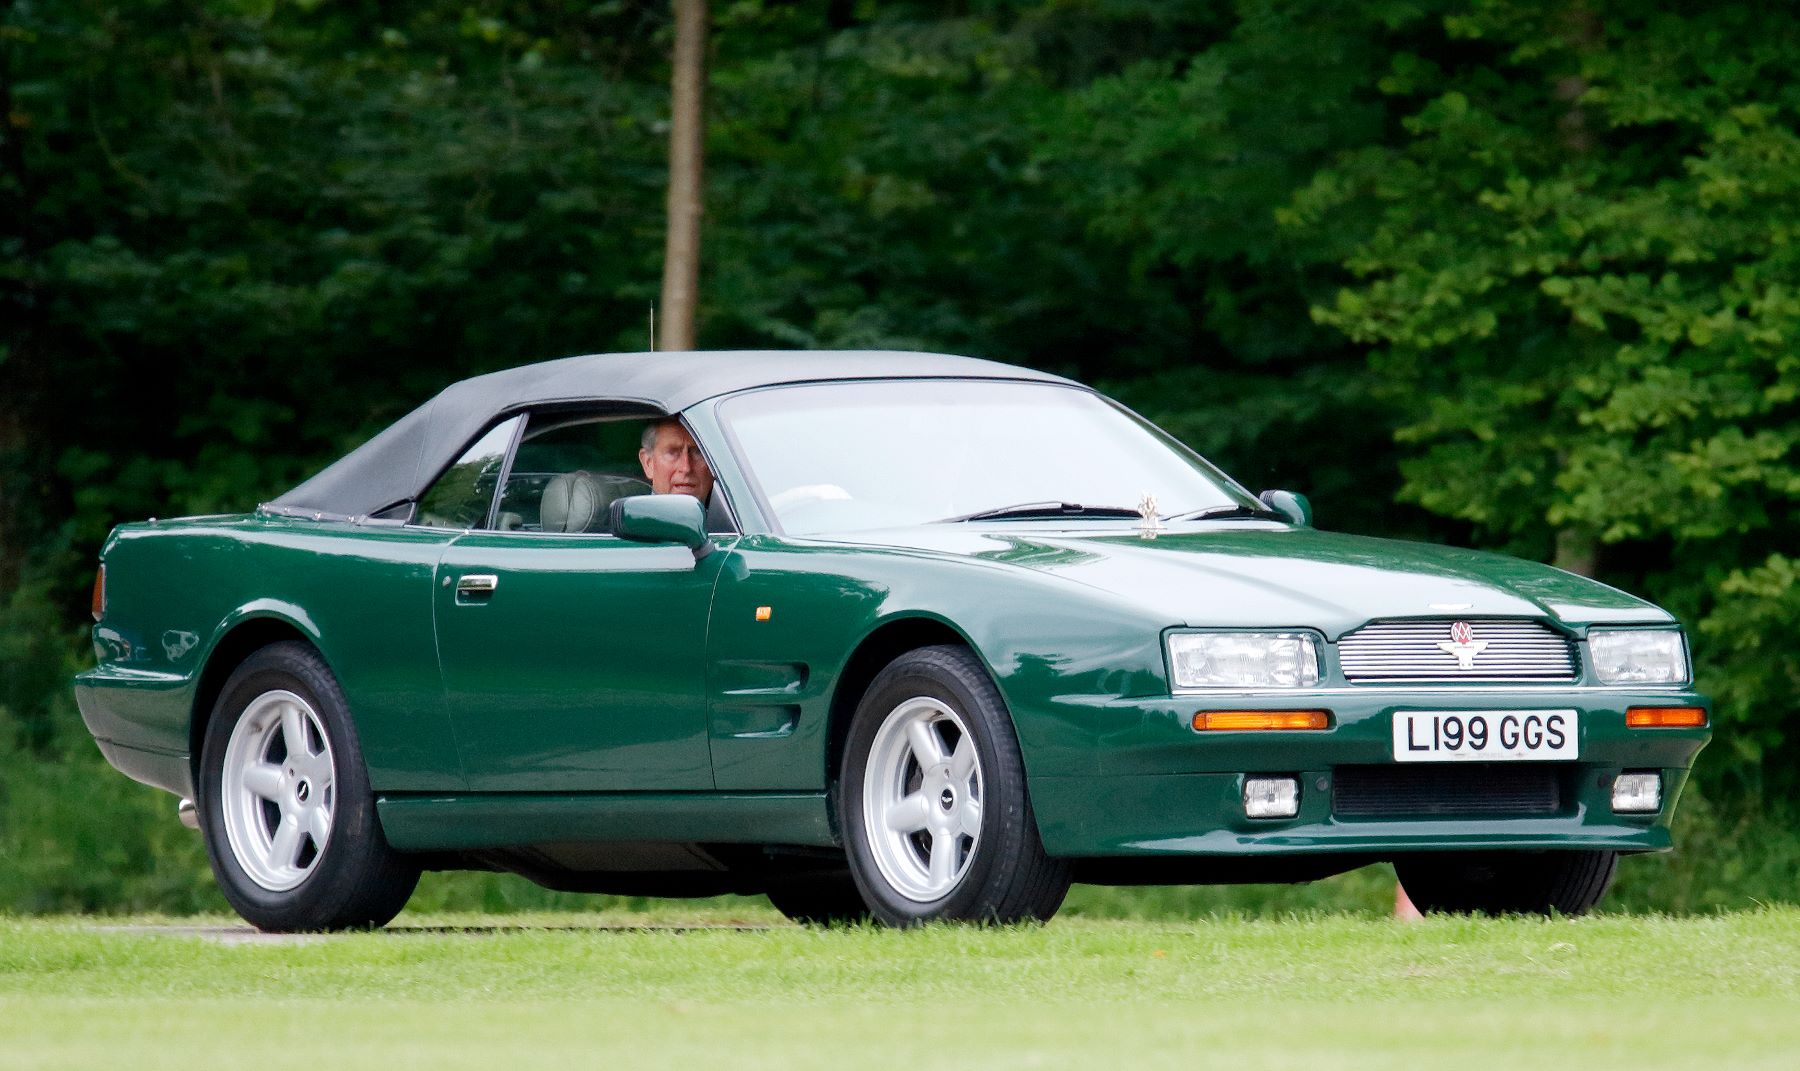 An Aston Martin Virage Volante model being driven by Prince Charles